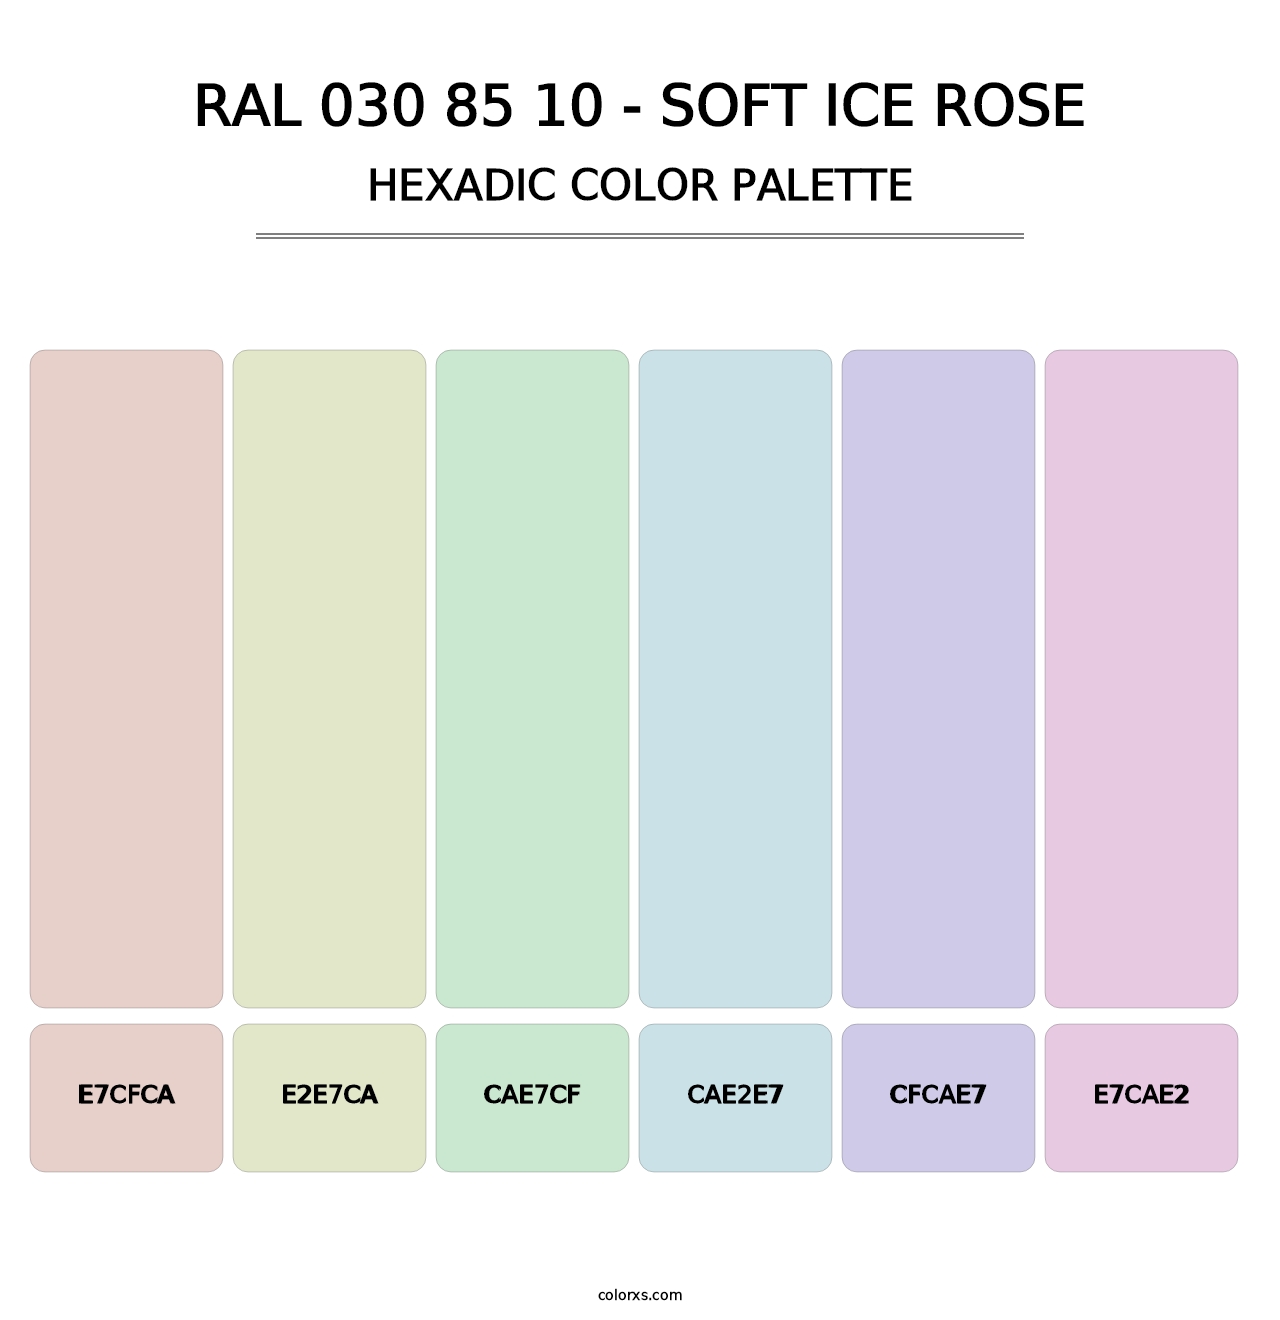 RAL 030 85 10 - Soft Ice Rose - Hexadic Color Palette